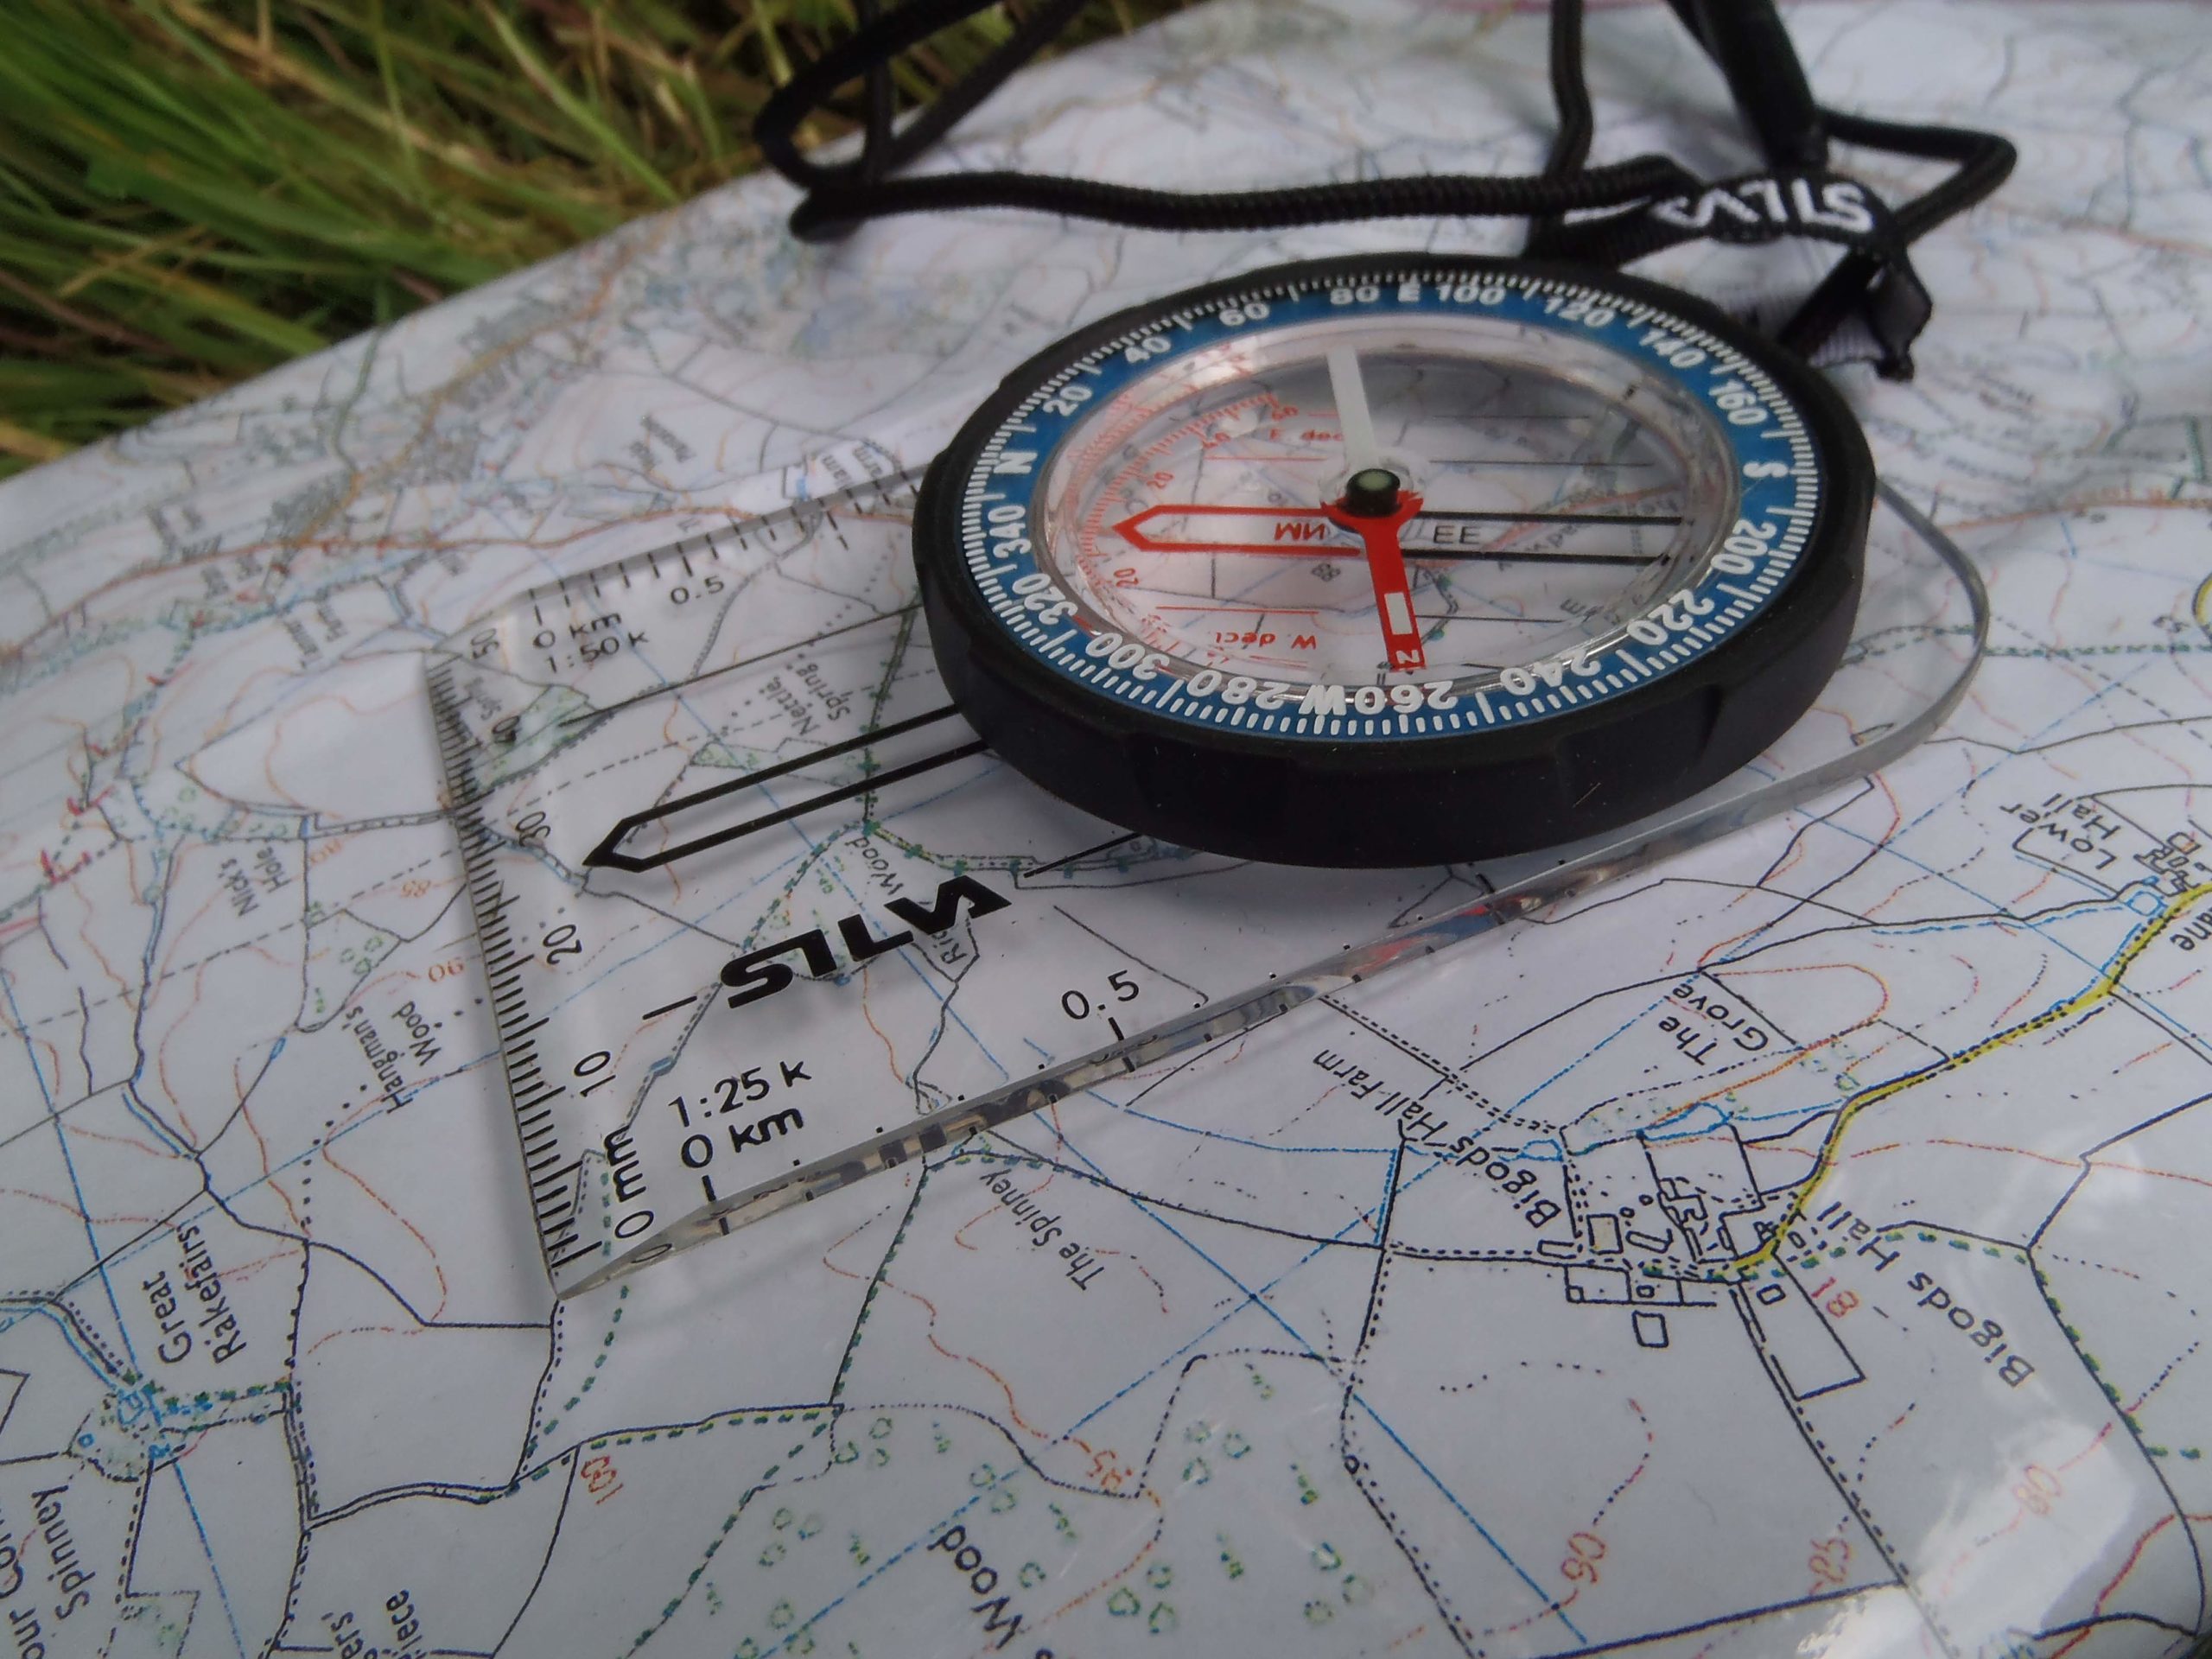 close up of a modern compass on city map in the grass